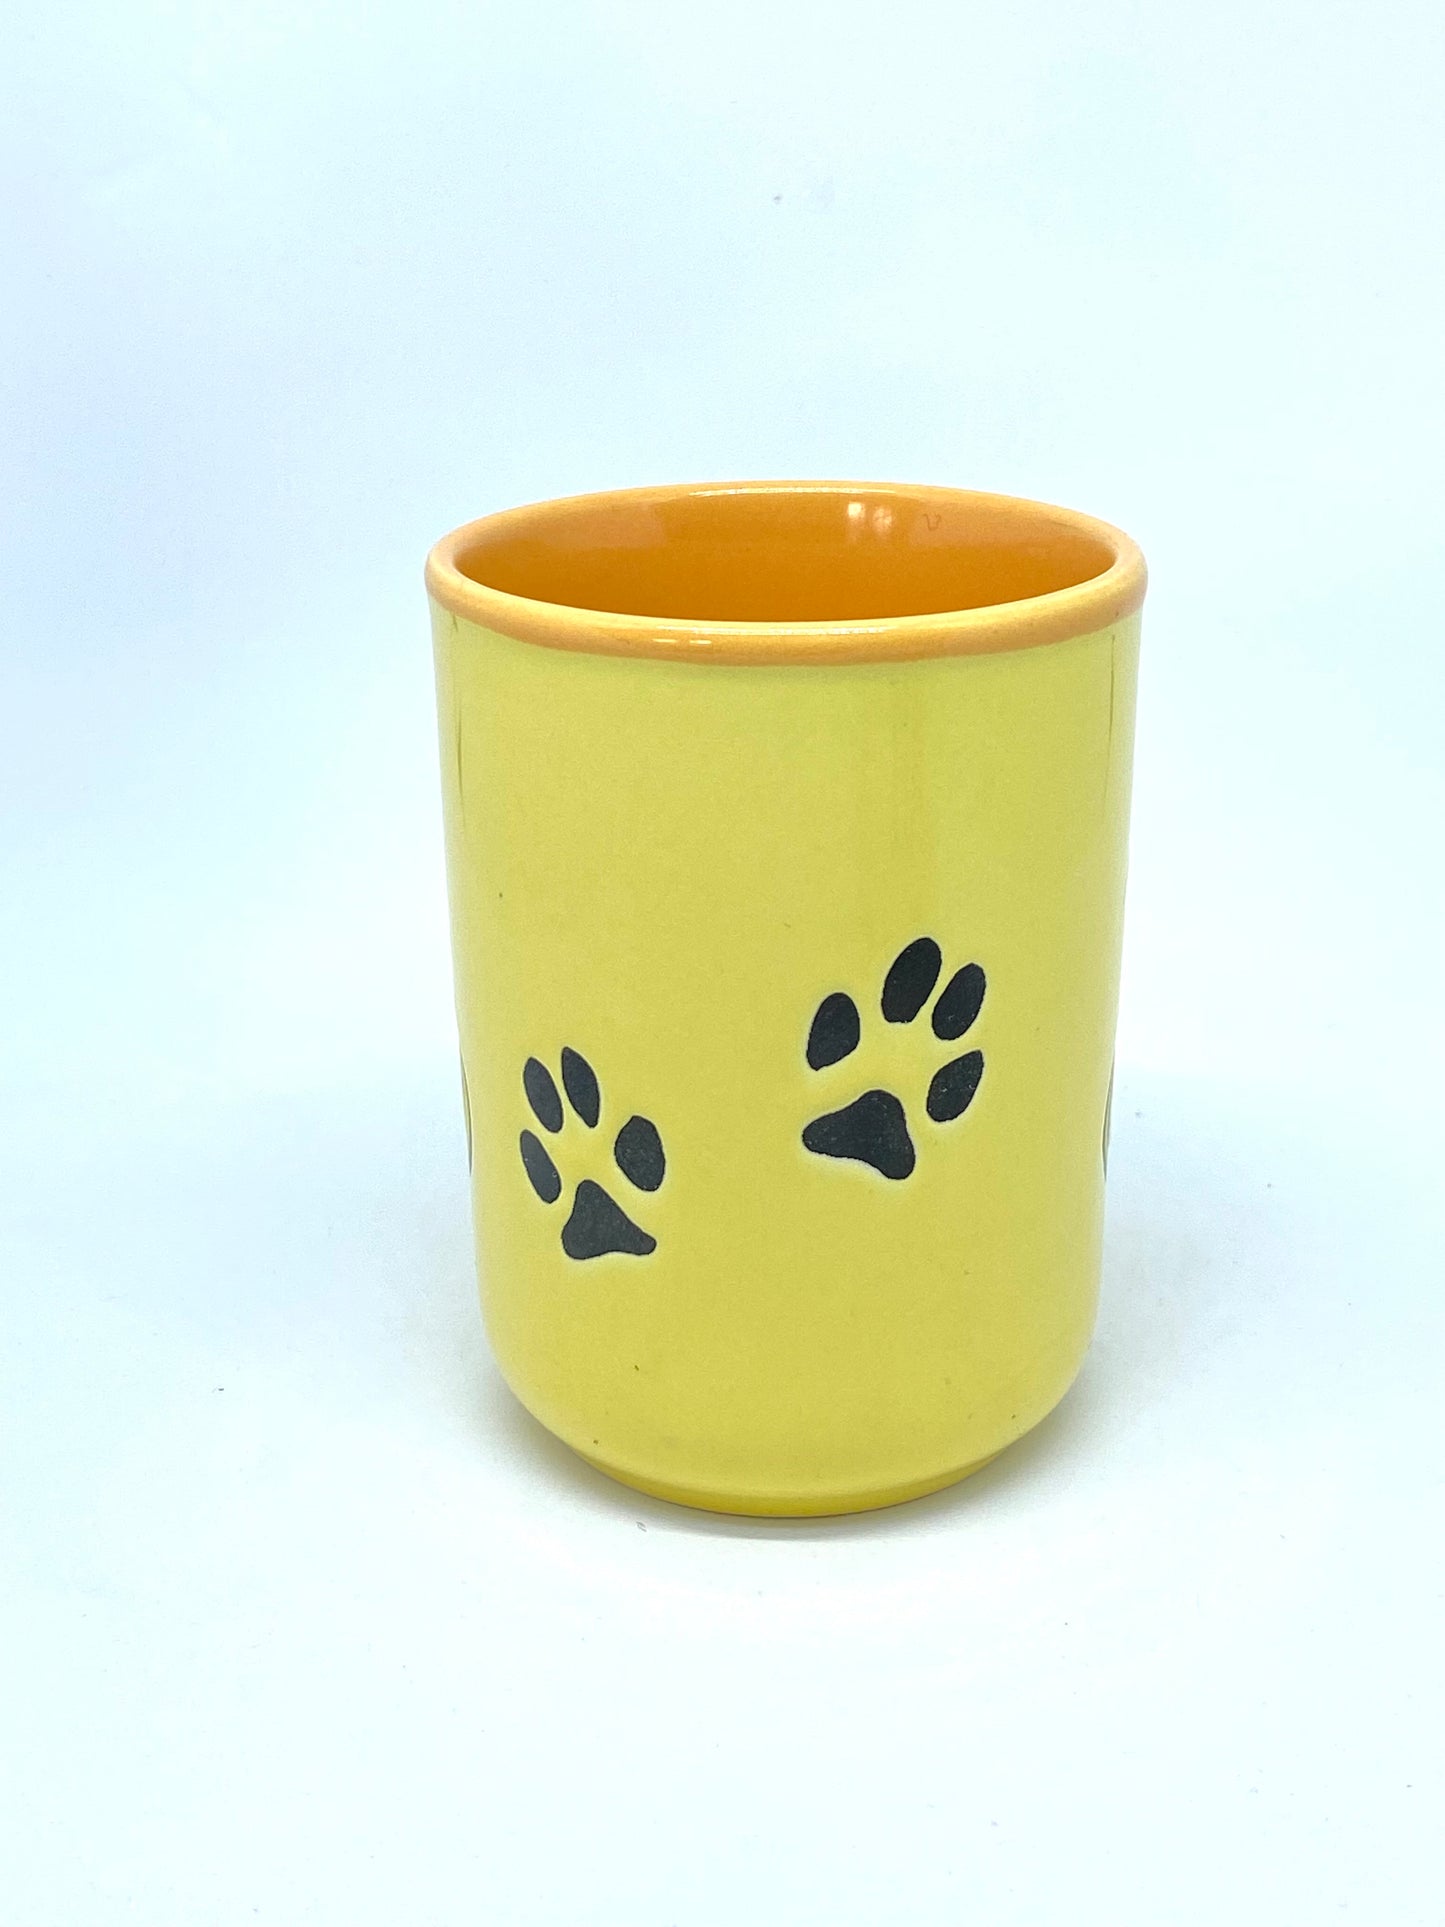 Retro Vintage Staffordshire cat cup - yellow with yellow cat